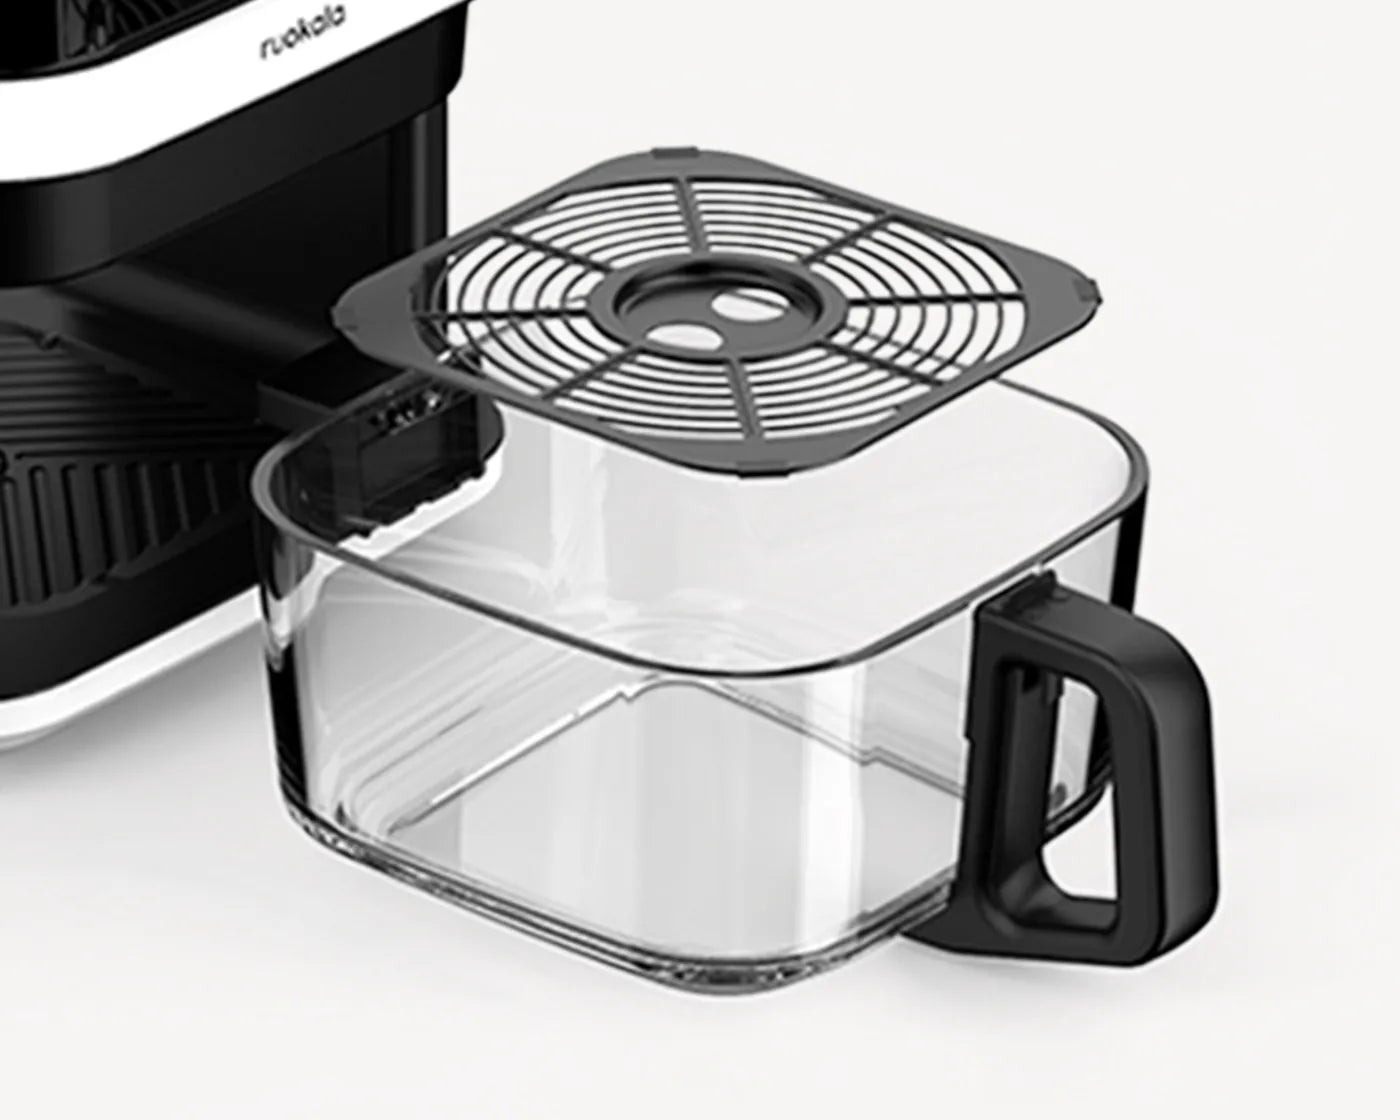 Ruokala air fryer with a transparent detachable basket showcasing the versatility and ease of use.